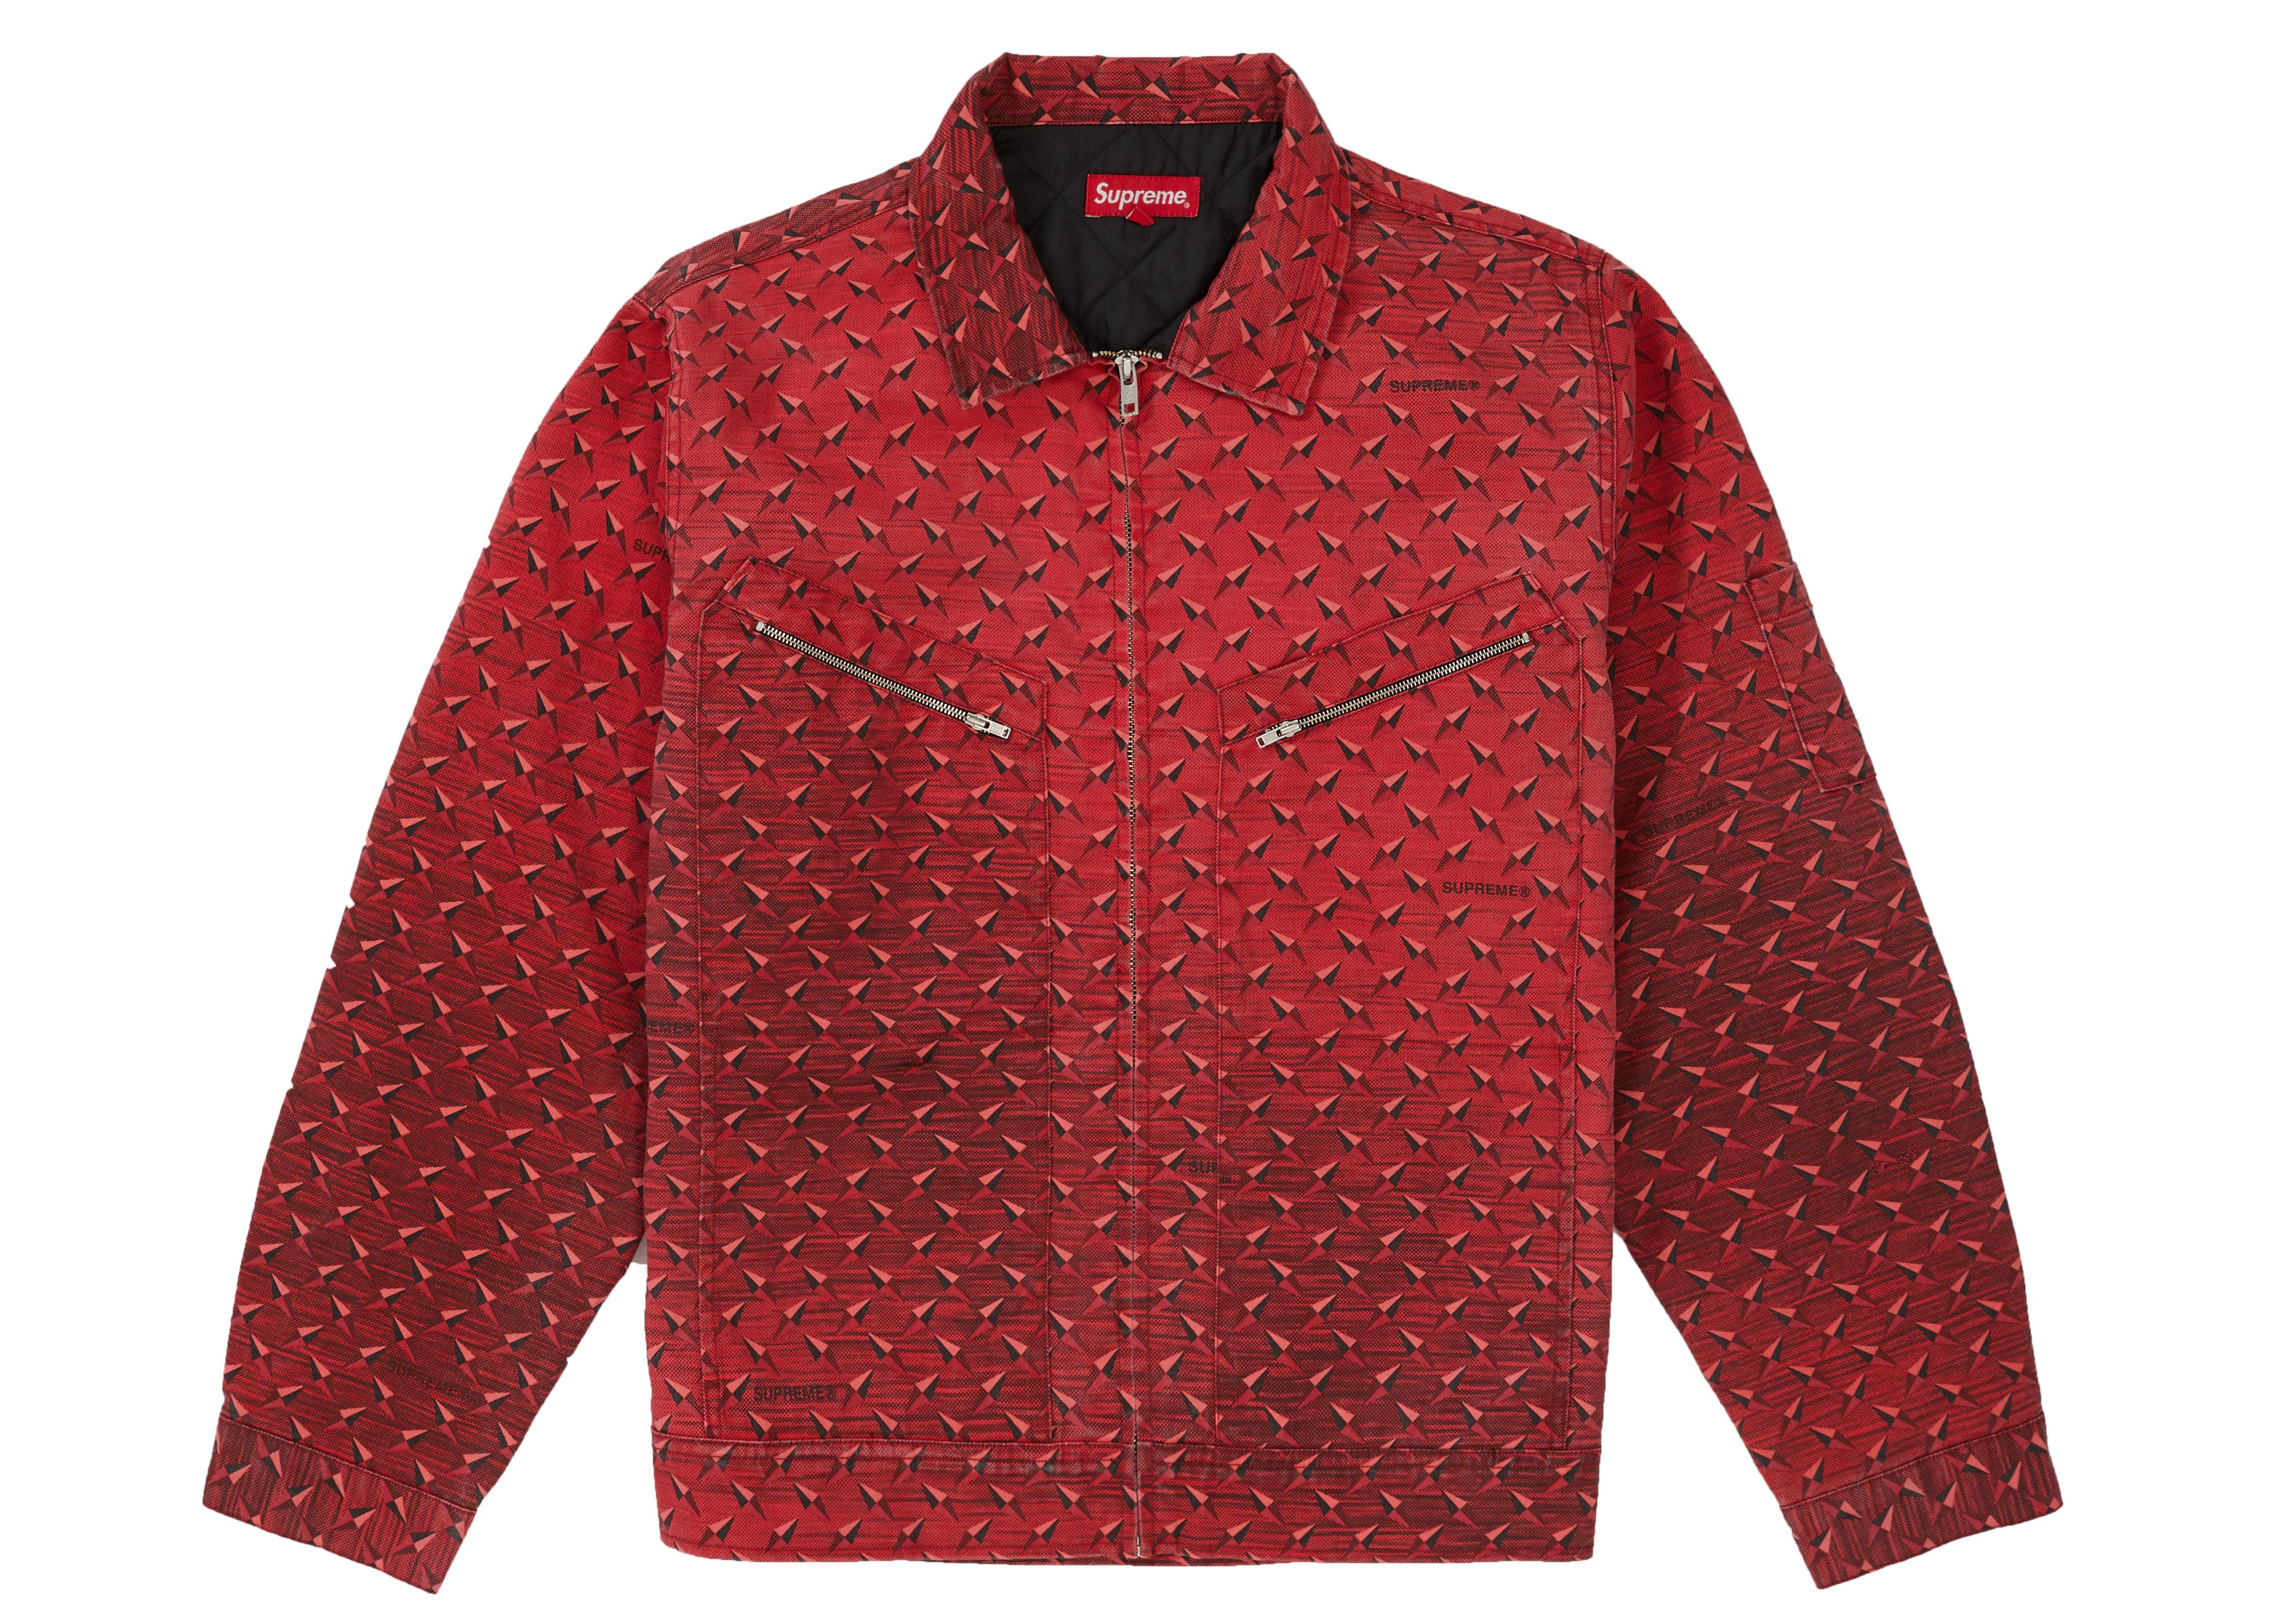 Supreme Diamond Plate Work Jacket Red in Red for Men - Lyst